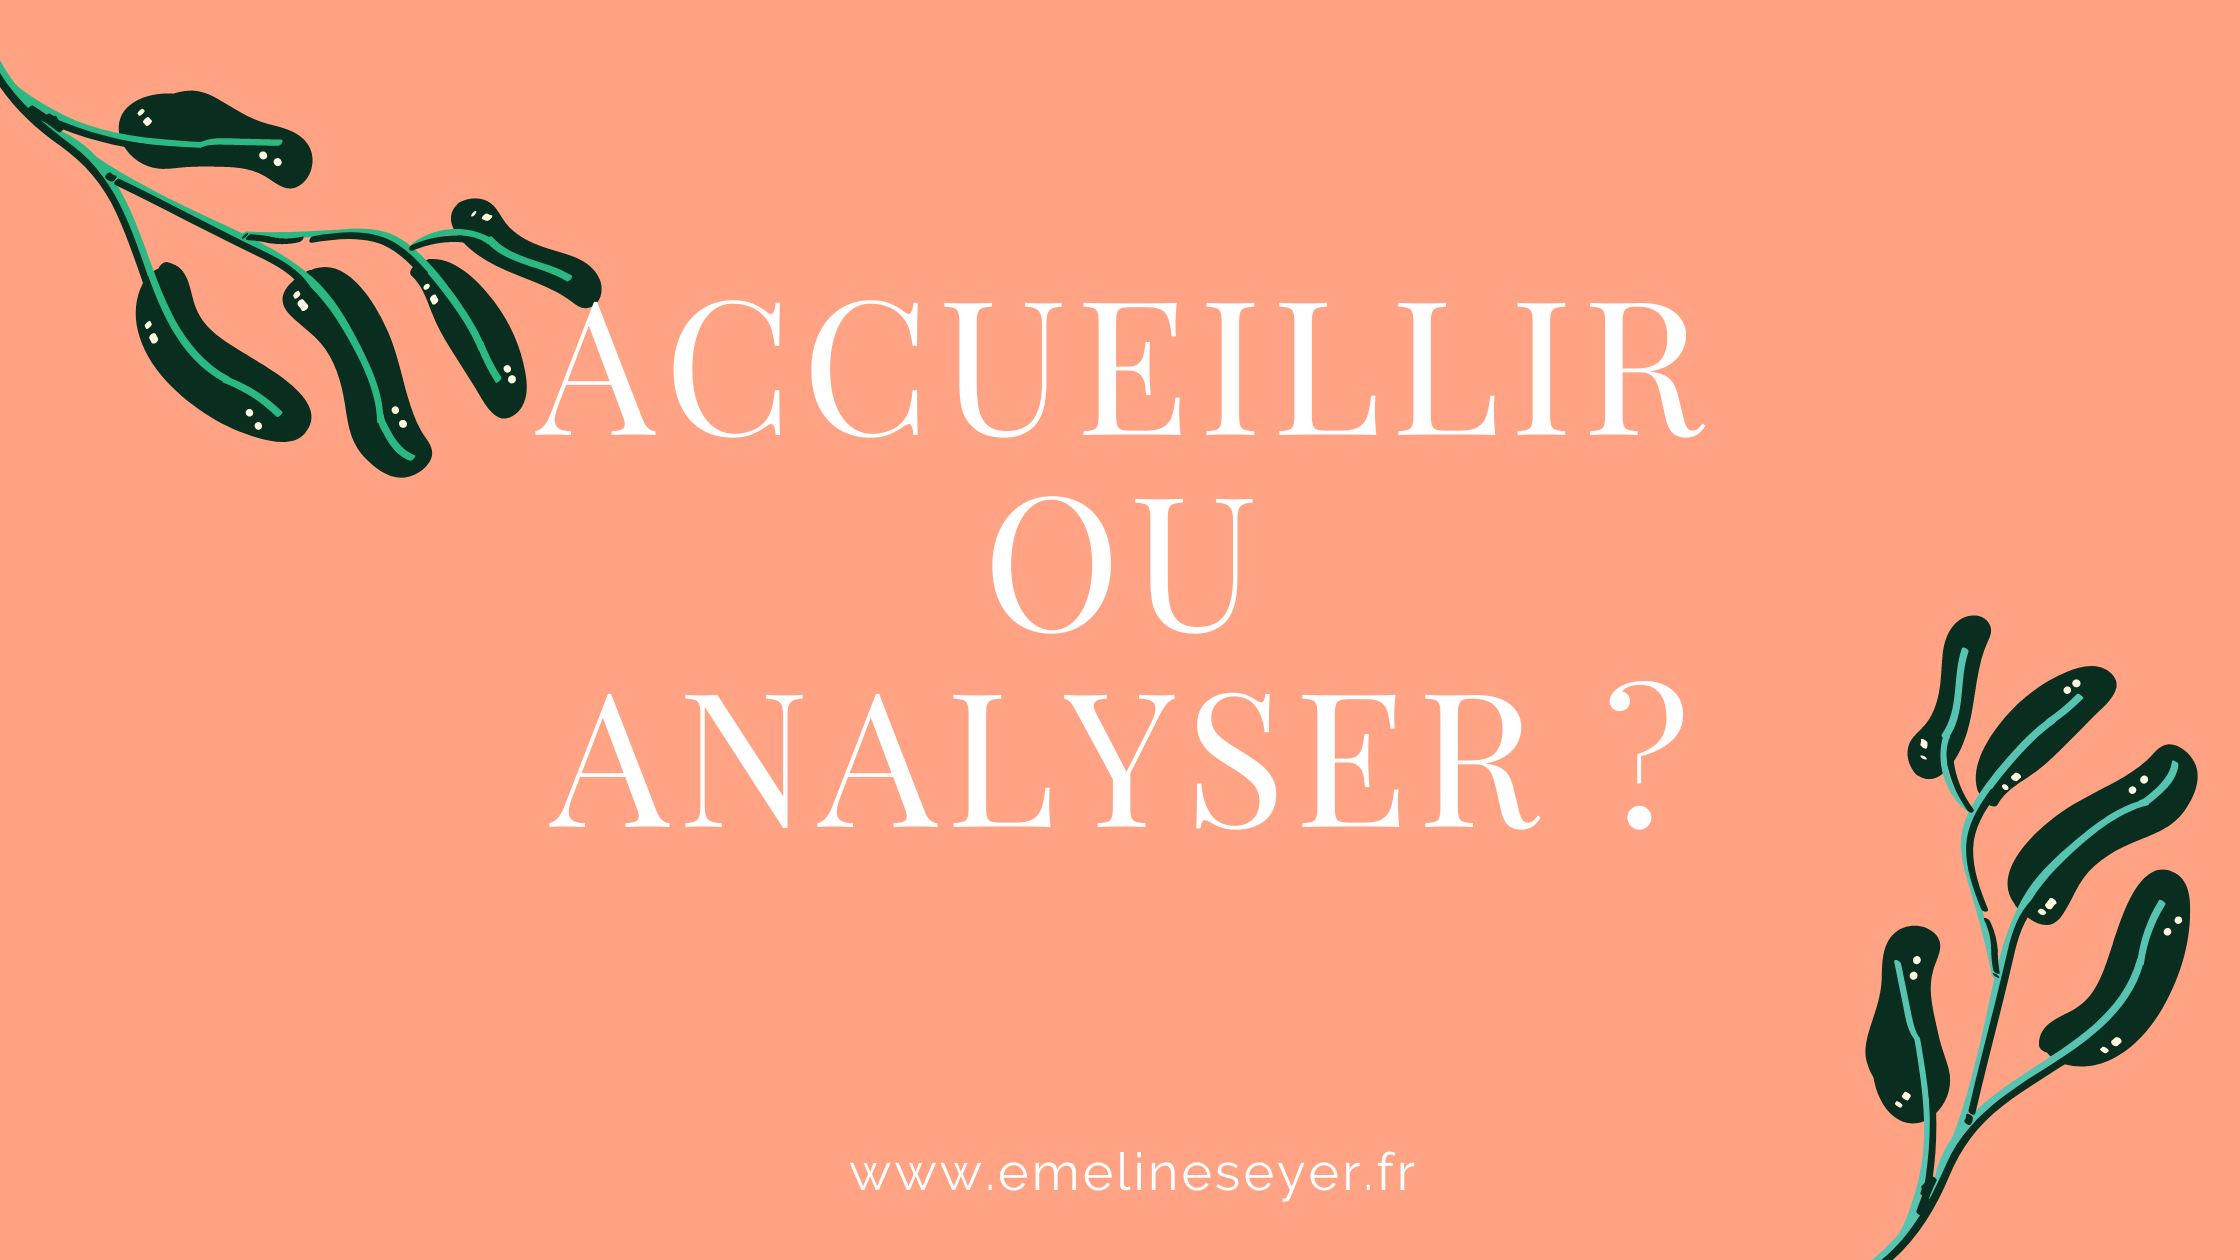 You are currently viewing Accueillir ou analyser ?